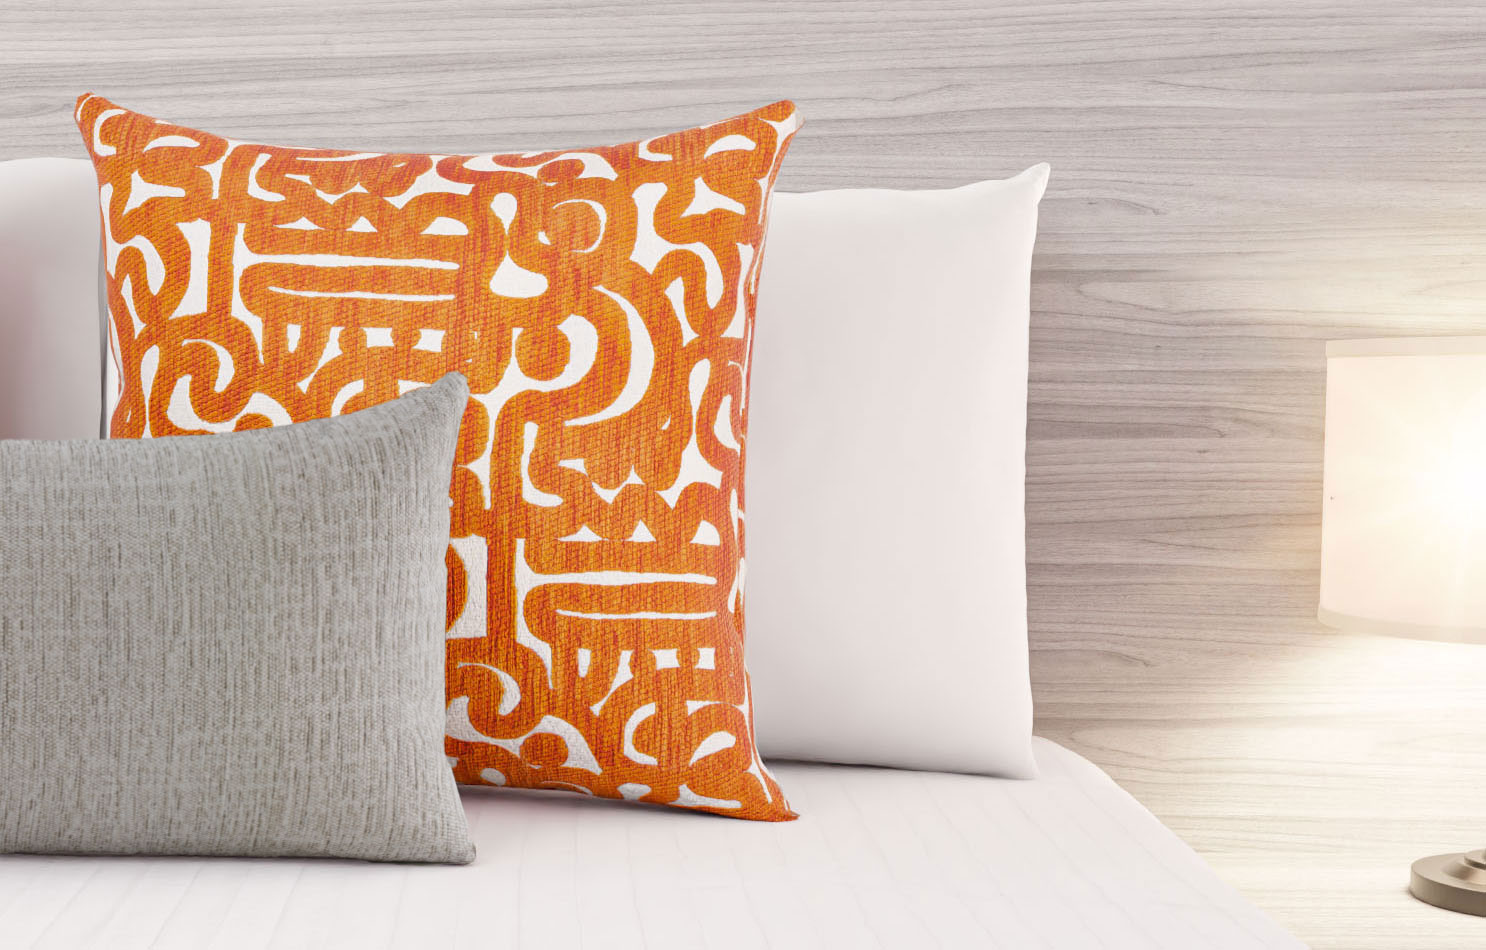 Selecting-the-Best-Hotel-Cushion